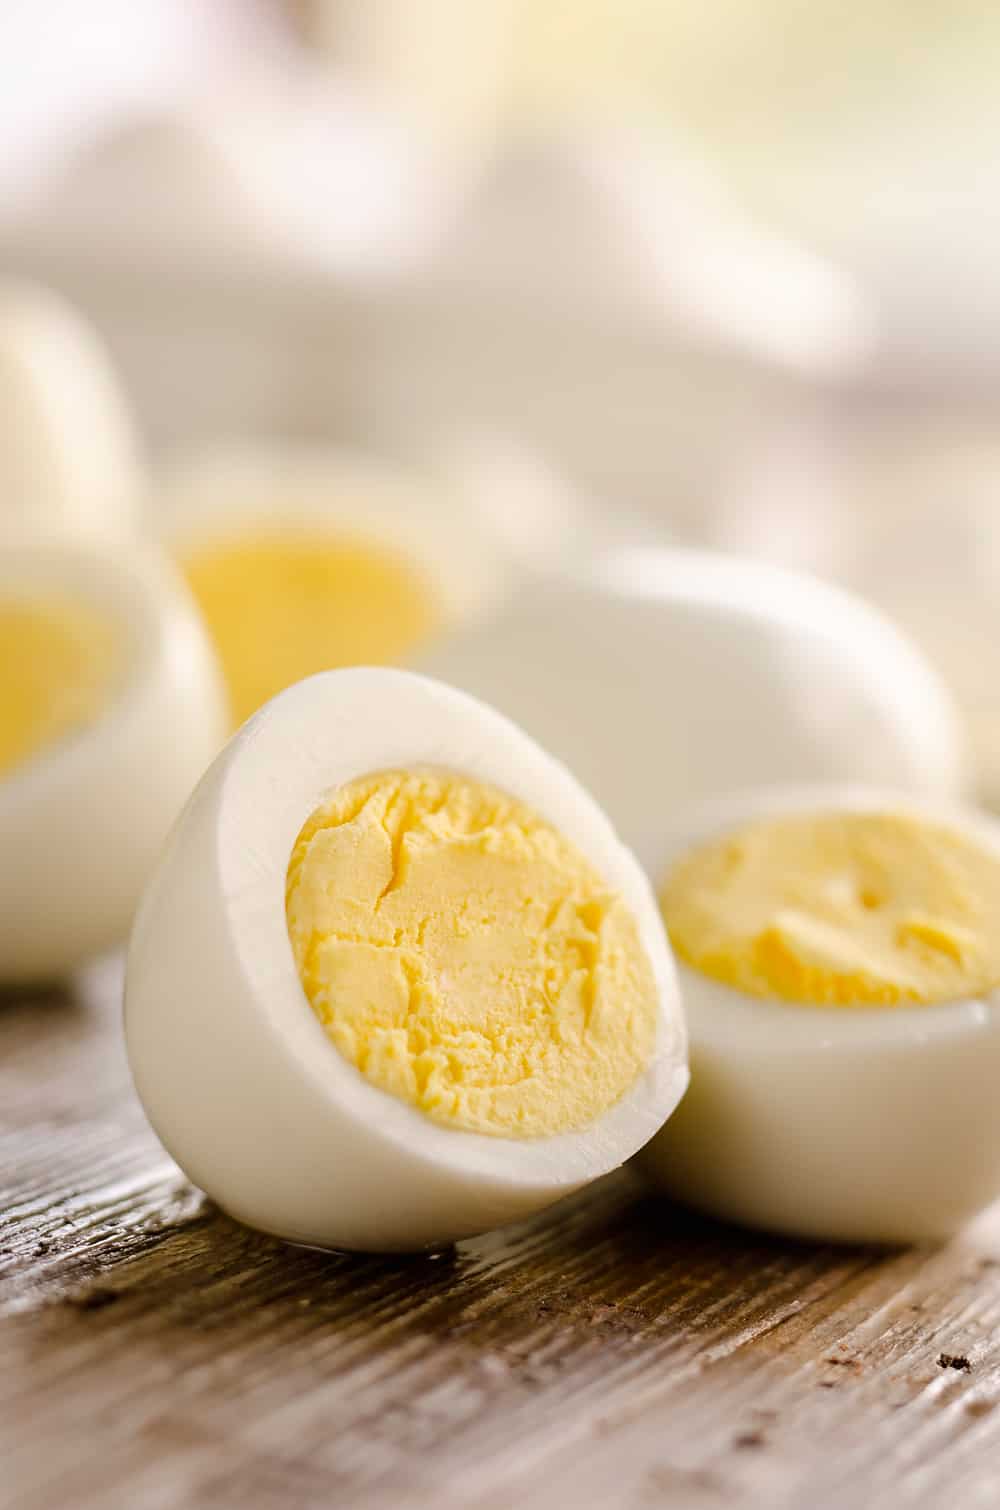 https://www.thecreativebite.com/wp-content/uploads/2017/04/How-to-Make-Perfect-Hard-Boiled-Eggs-Pressure-Cooker-The-Creative-Bite-1-copy.jpg